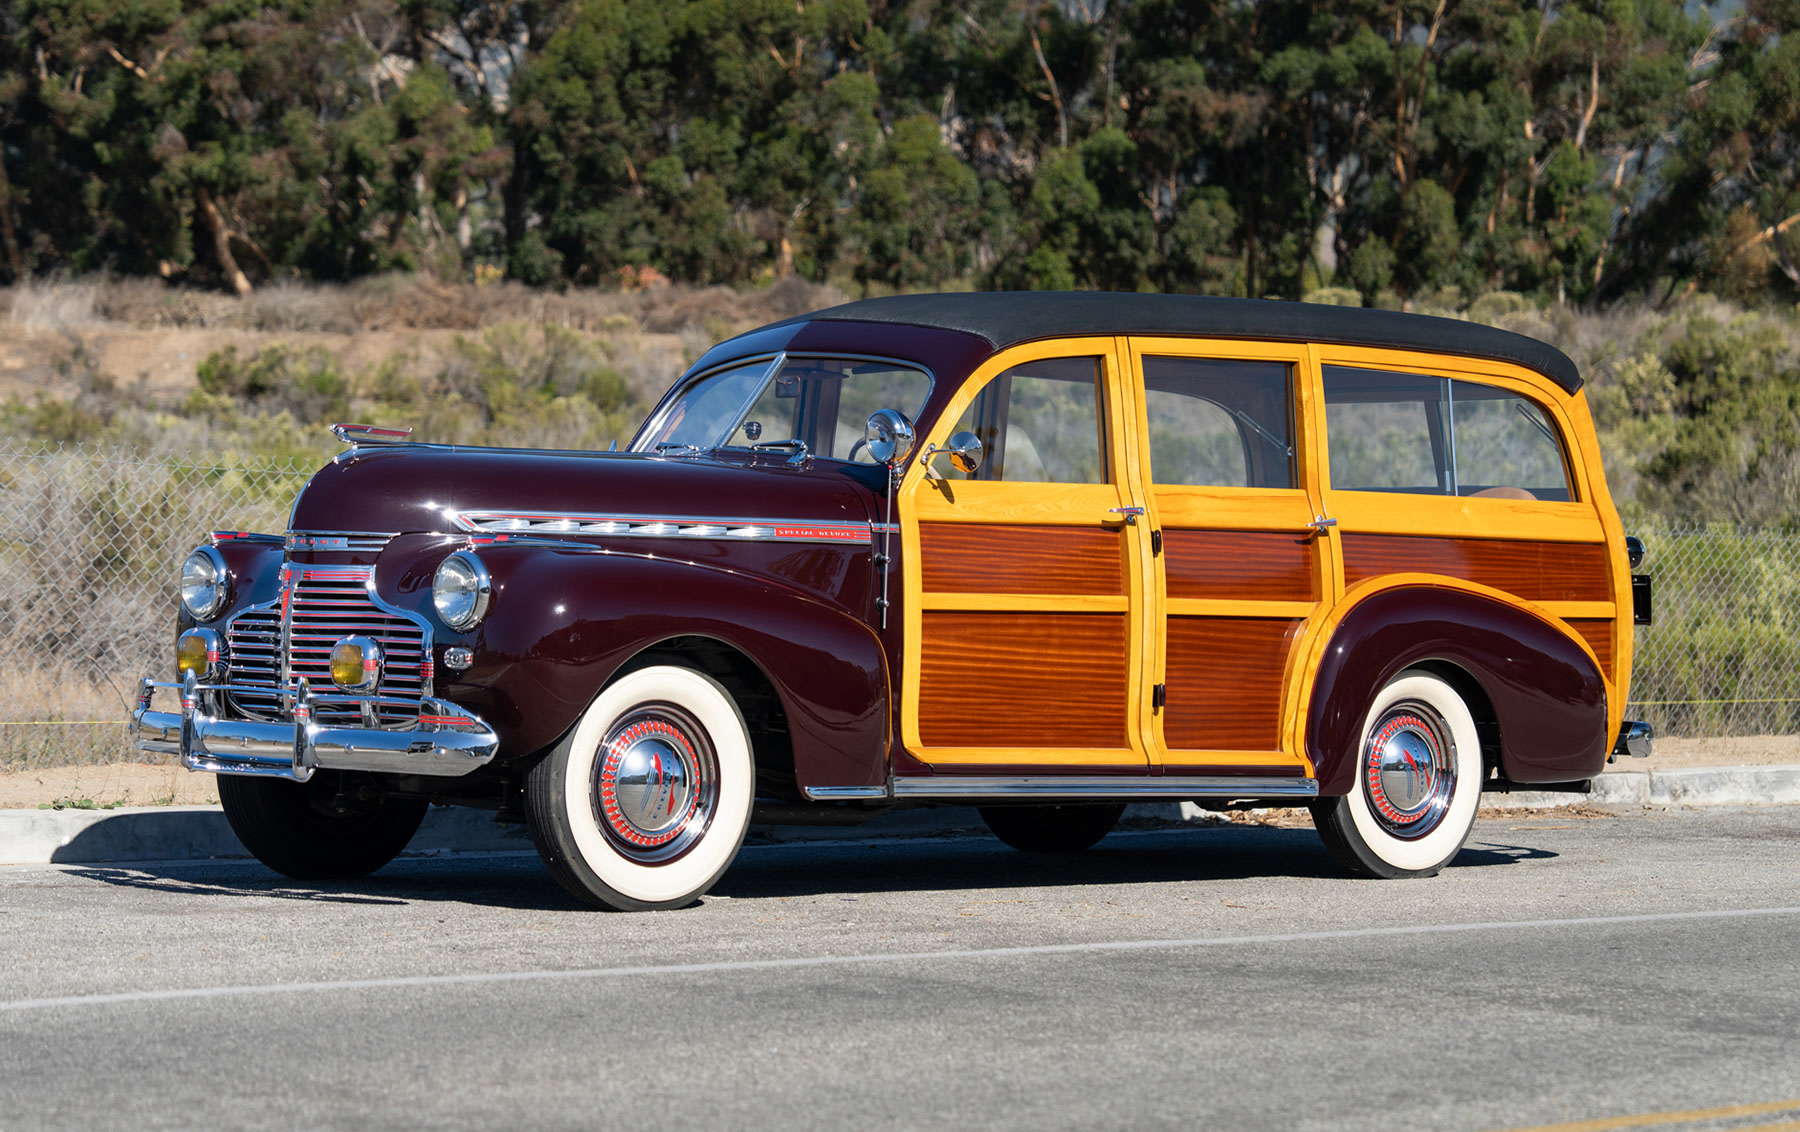 1941 Chevrolet Special Deluxe Woodie Station Wagon